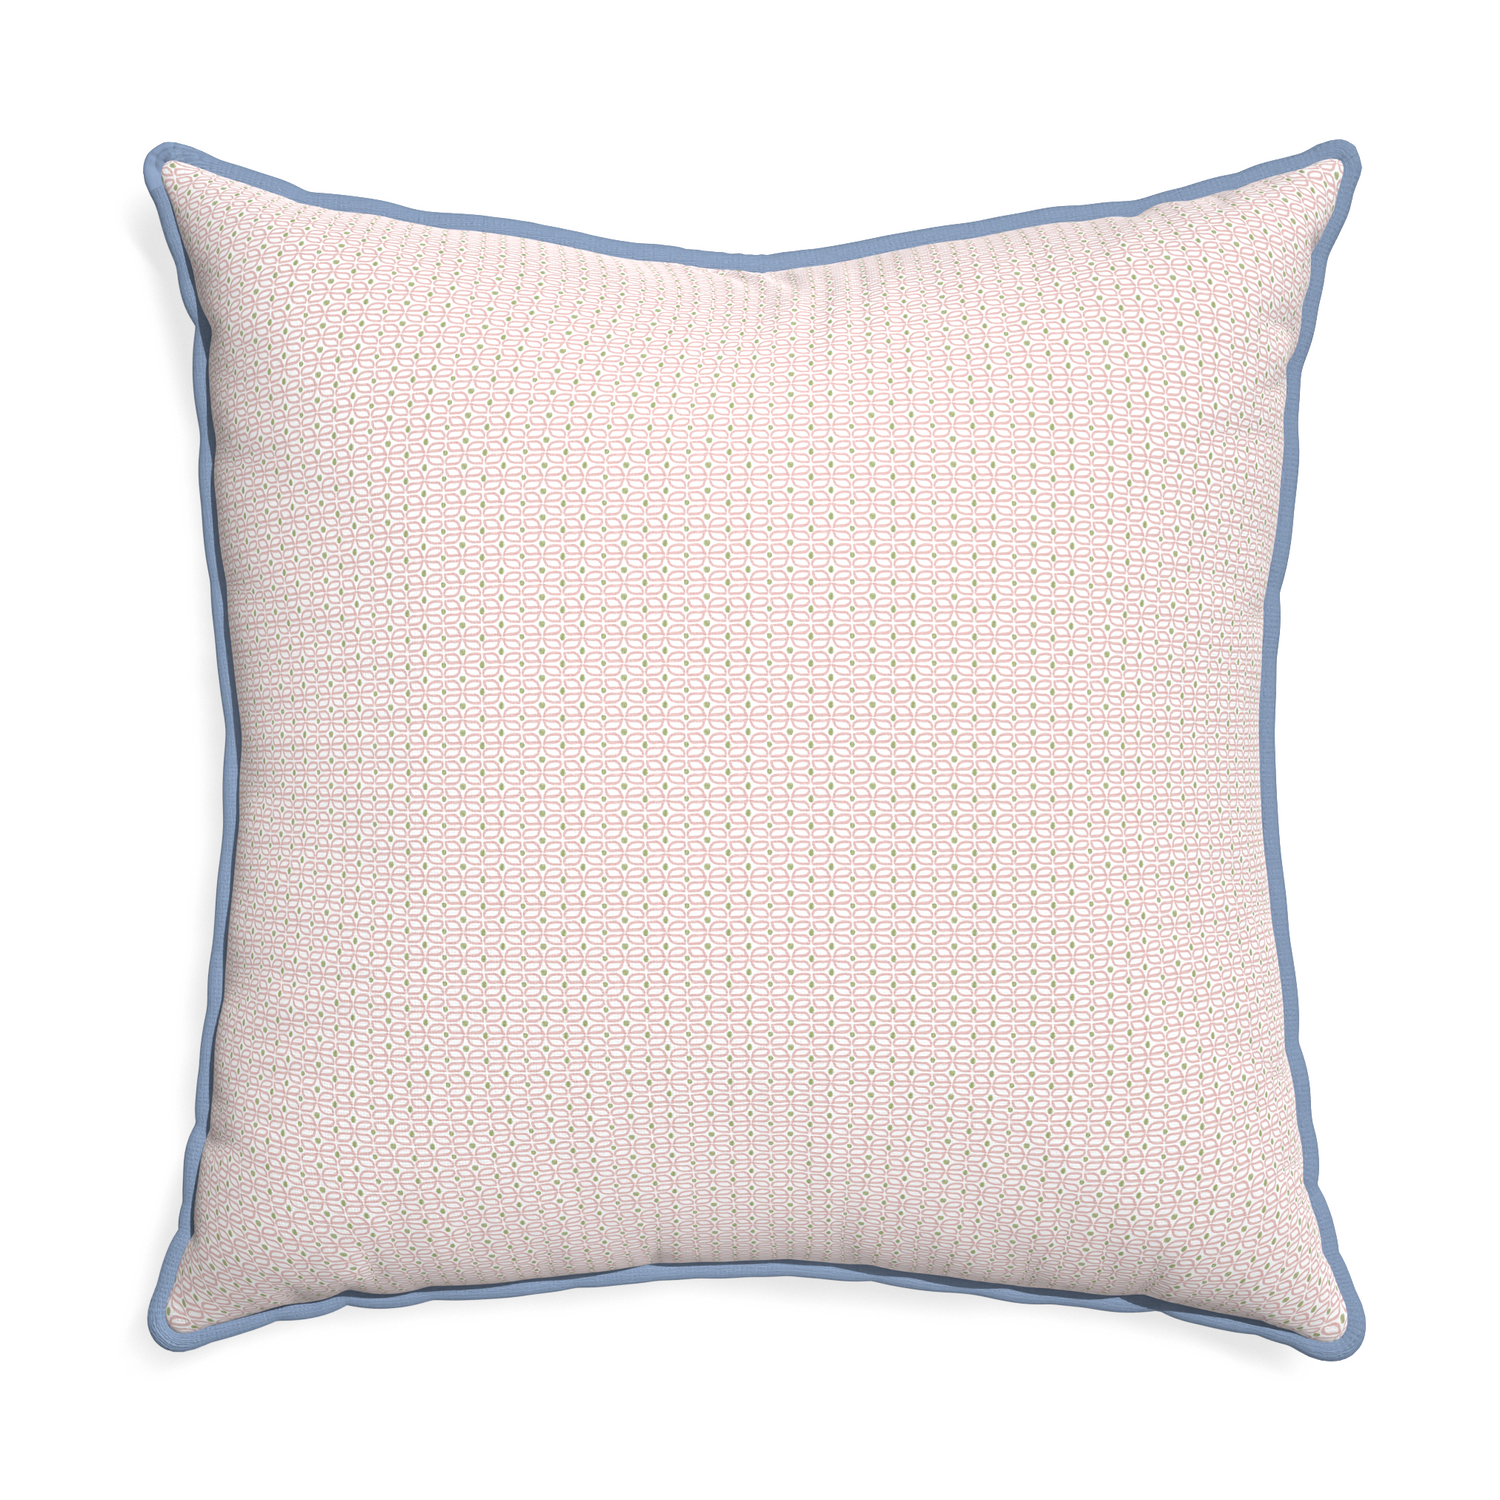 Euro-sham loomi pink custom pillow with sky piping on white background